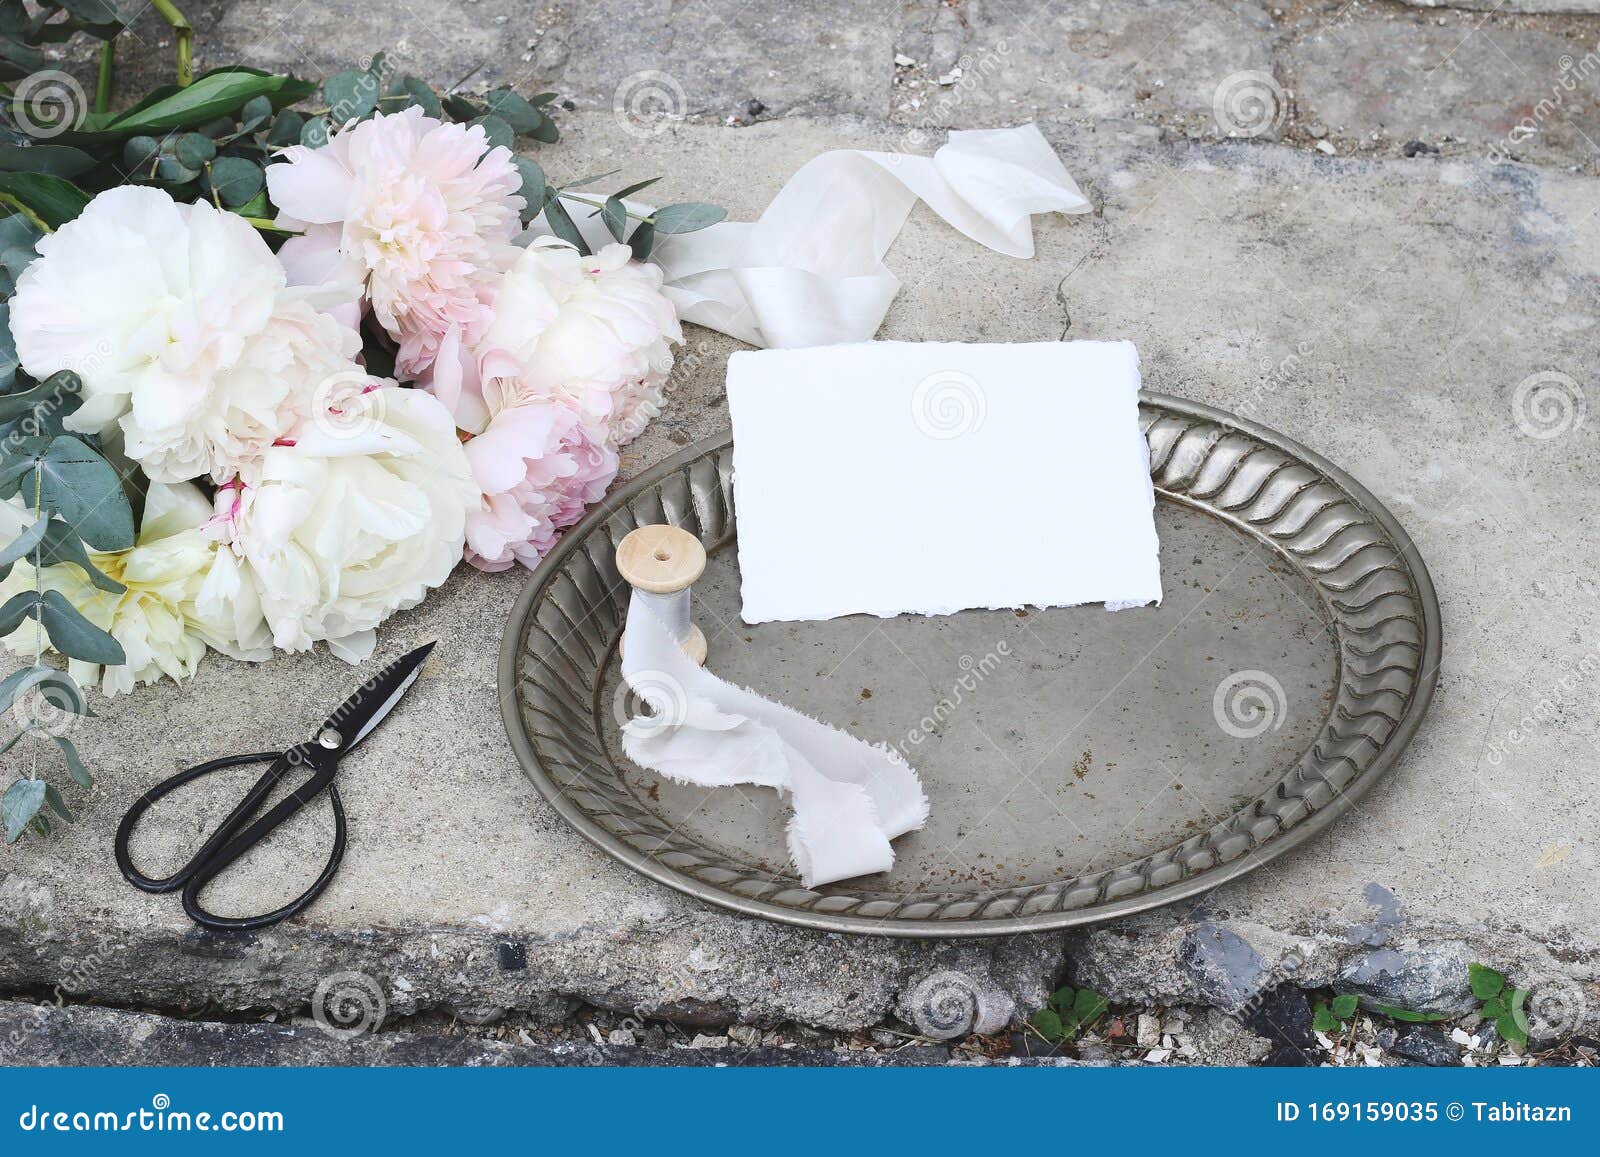 Download Feminine Wedding Still Life Composition With Vintage Silver Tray, Old Scissors And Silk Ribbons ...